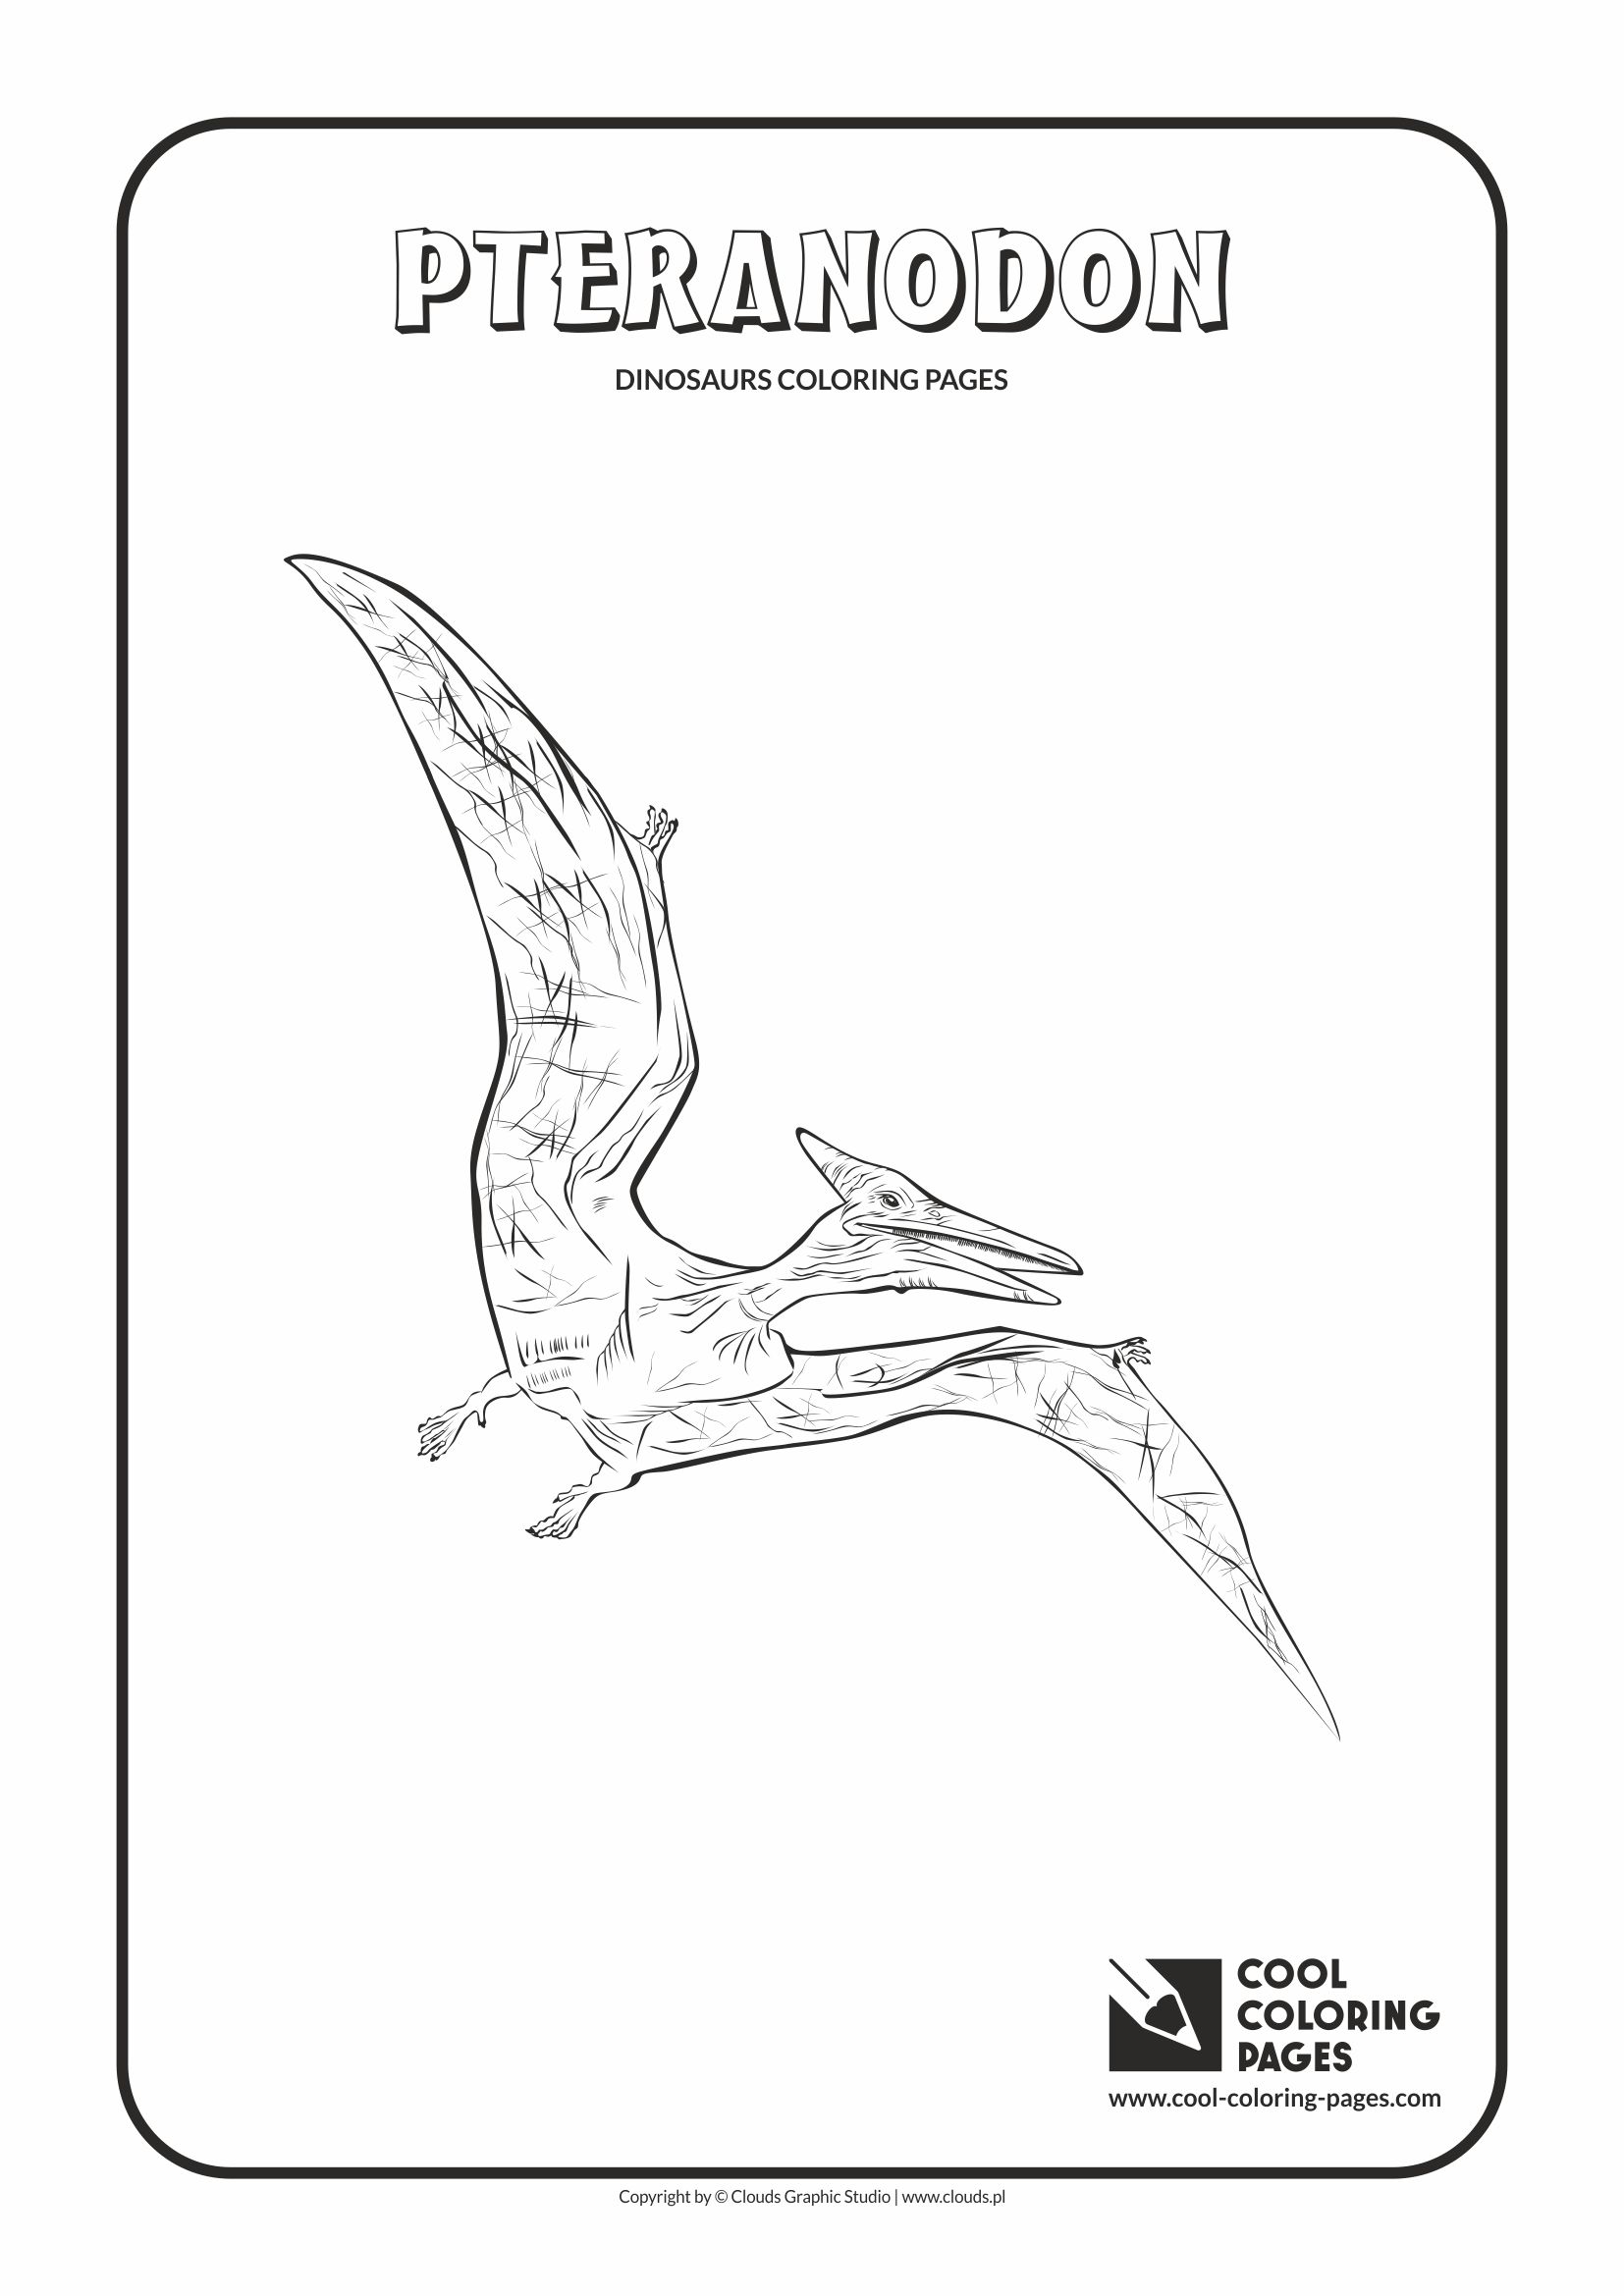 Cool Coloring Pages - Animals / Pteranodon / Coloring page with pteranodon